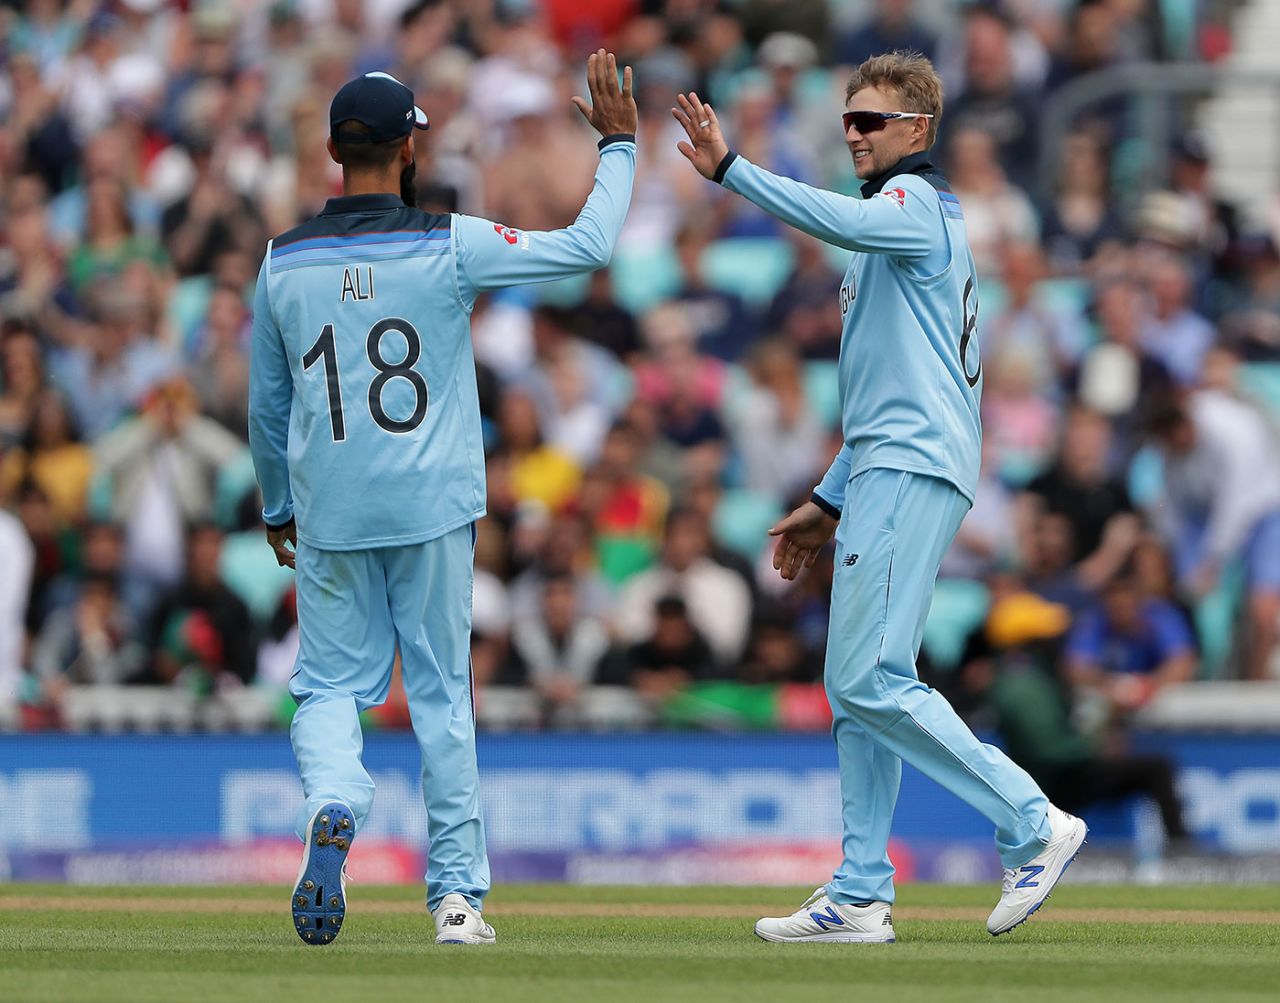 Joe Root claimed three wickets with his spin, England v Afghanistan, World Cup 2019 warm-ups, The Oval, May 27, 2019